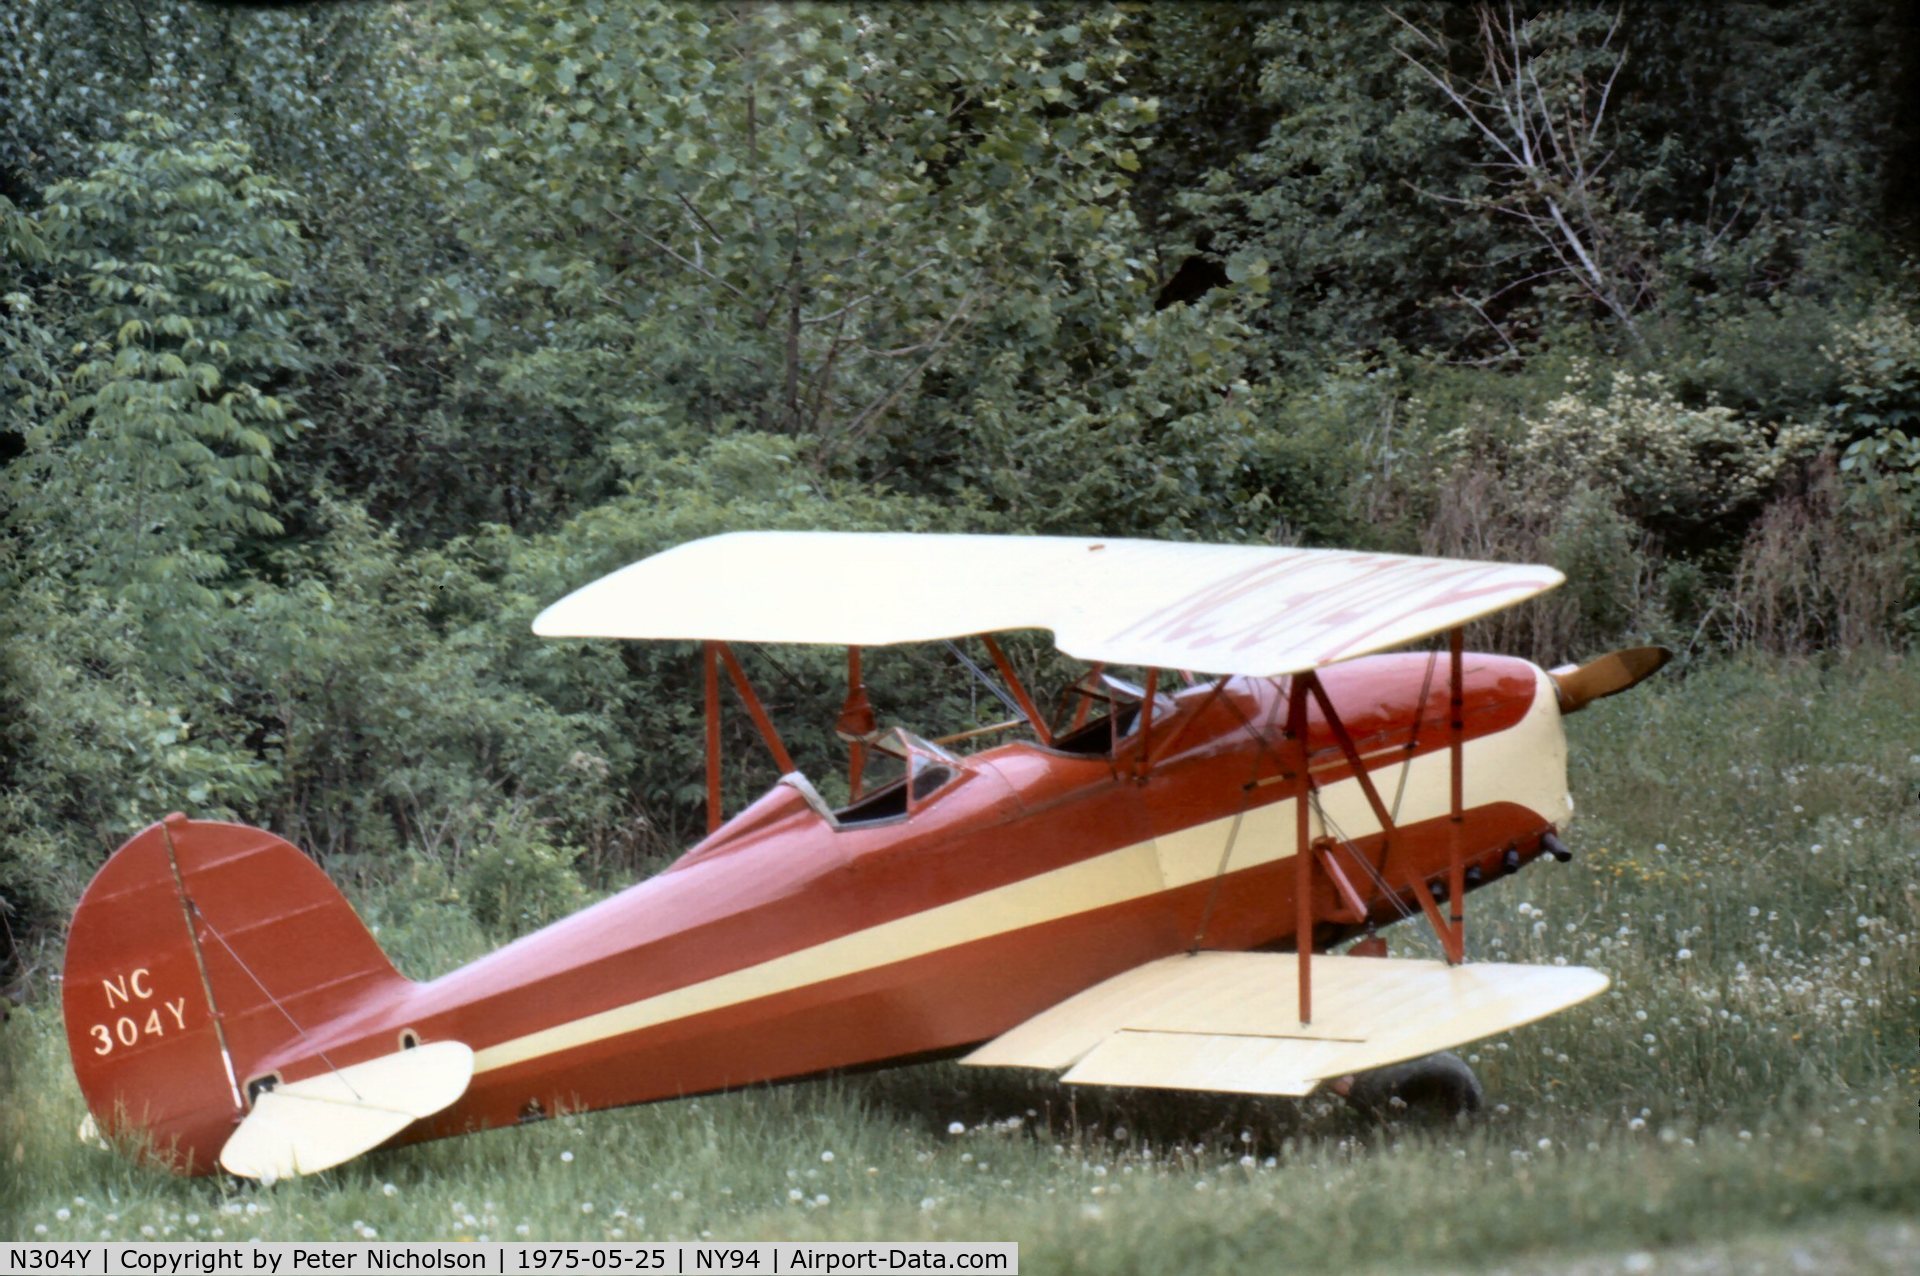 N304Y, 1931 Great Lakes 2T-1 Sport Trainer C/N 191, As NC304Y this Great Lakes Trainer was present at Rhinebeck in the summer of 1975.